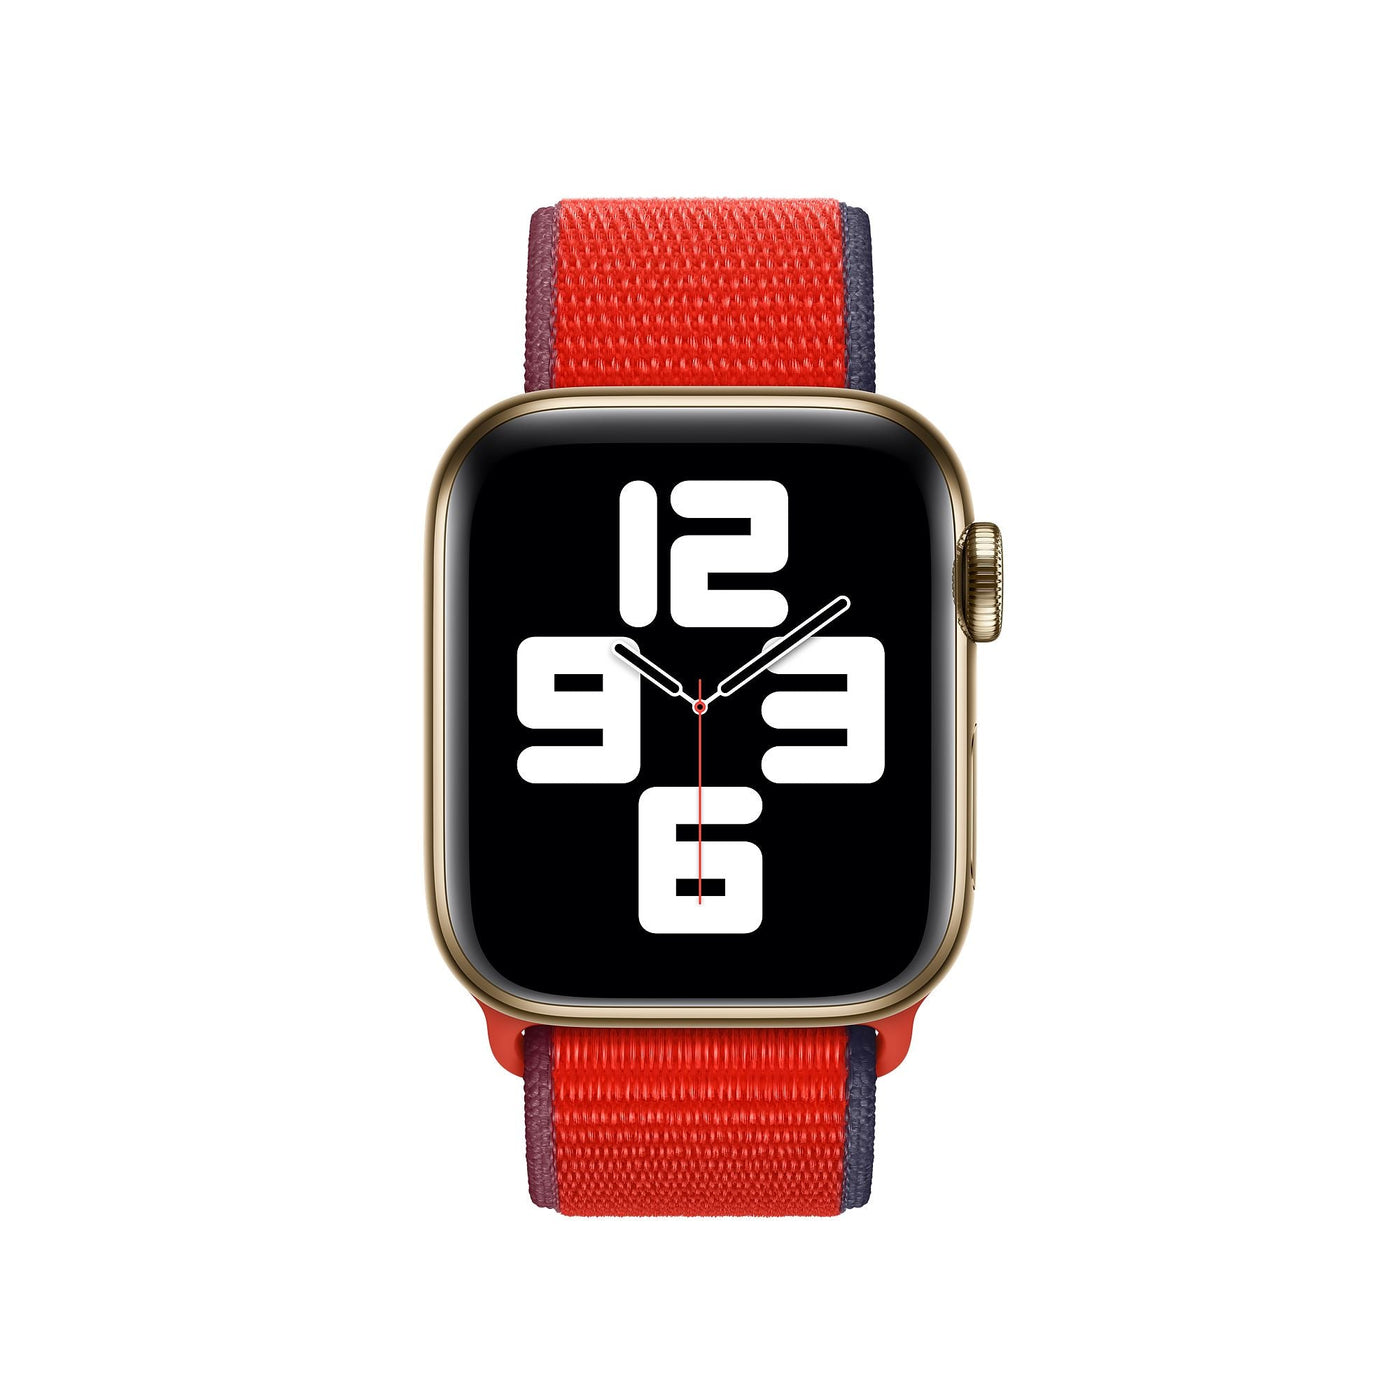 ALK Classic Nylon Band for Apple Watch in Tricolour Red - Alk Designs